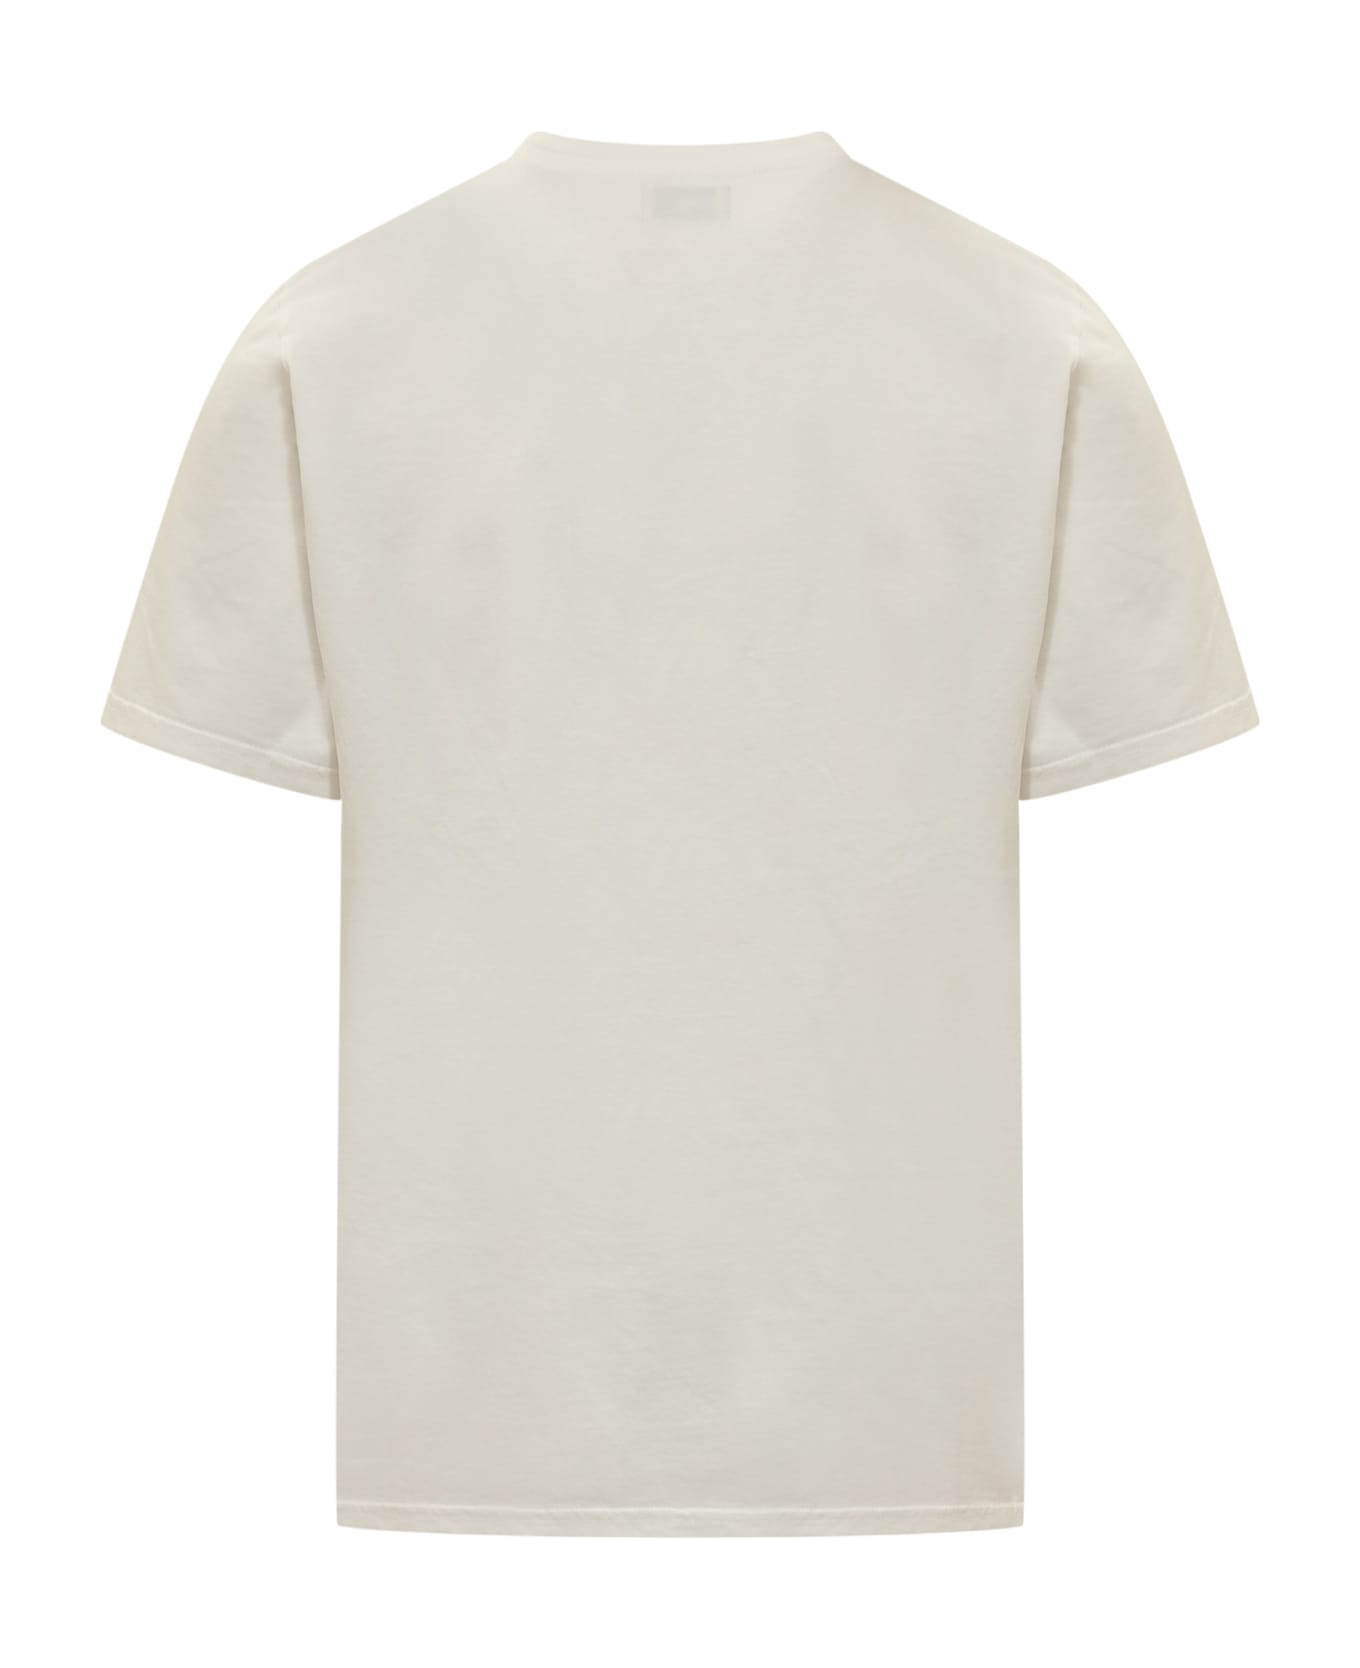 Autry Crew-neck T-shirt With Front Logo - APPAREL WHITE シャツ